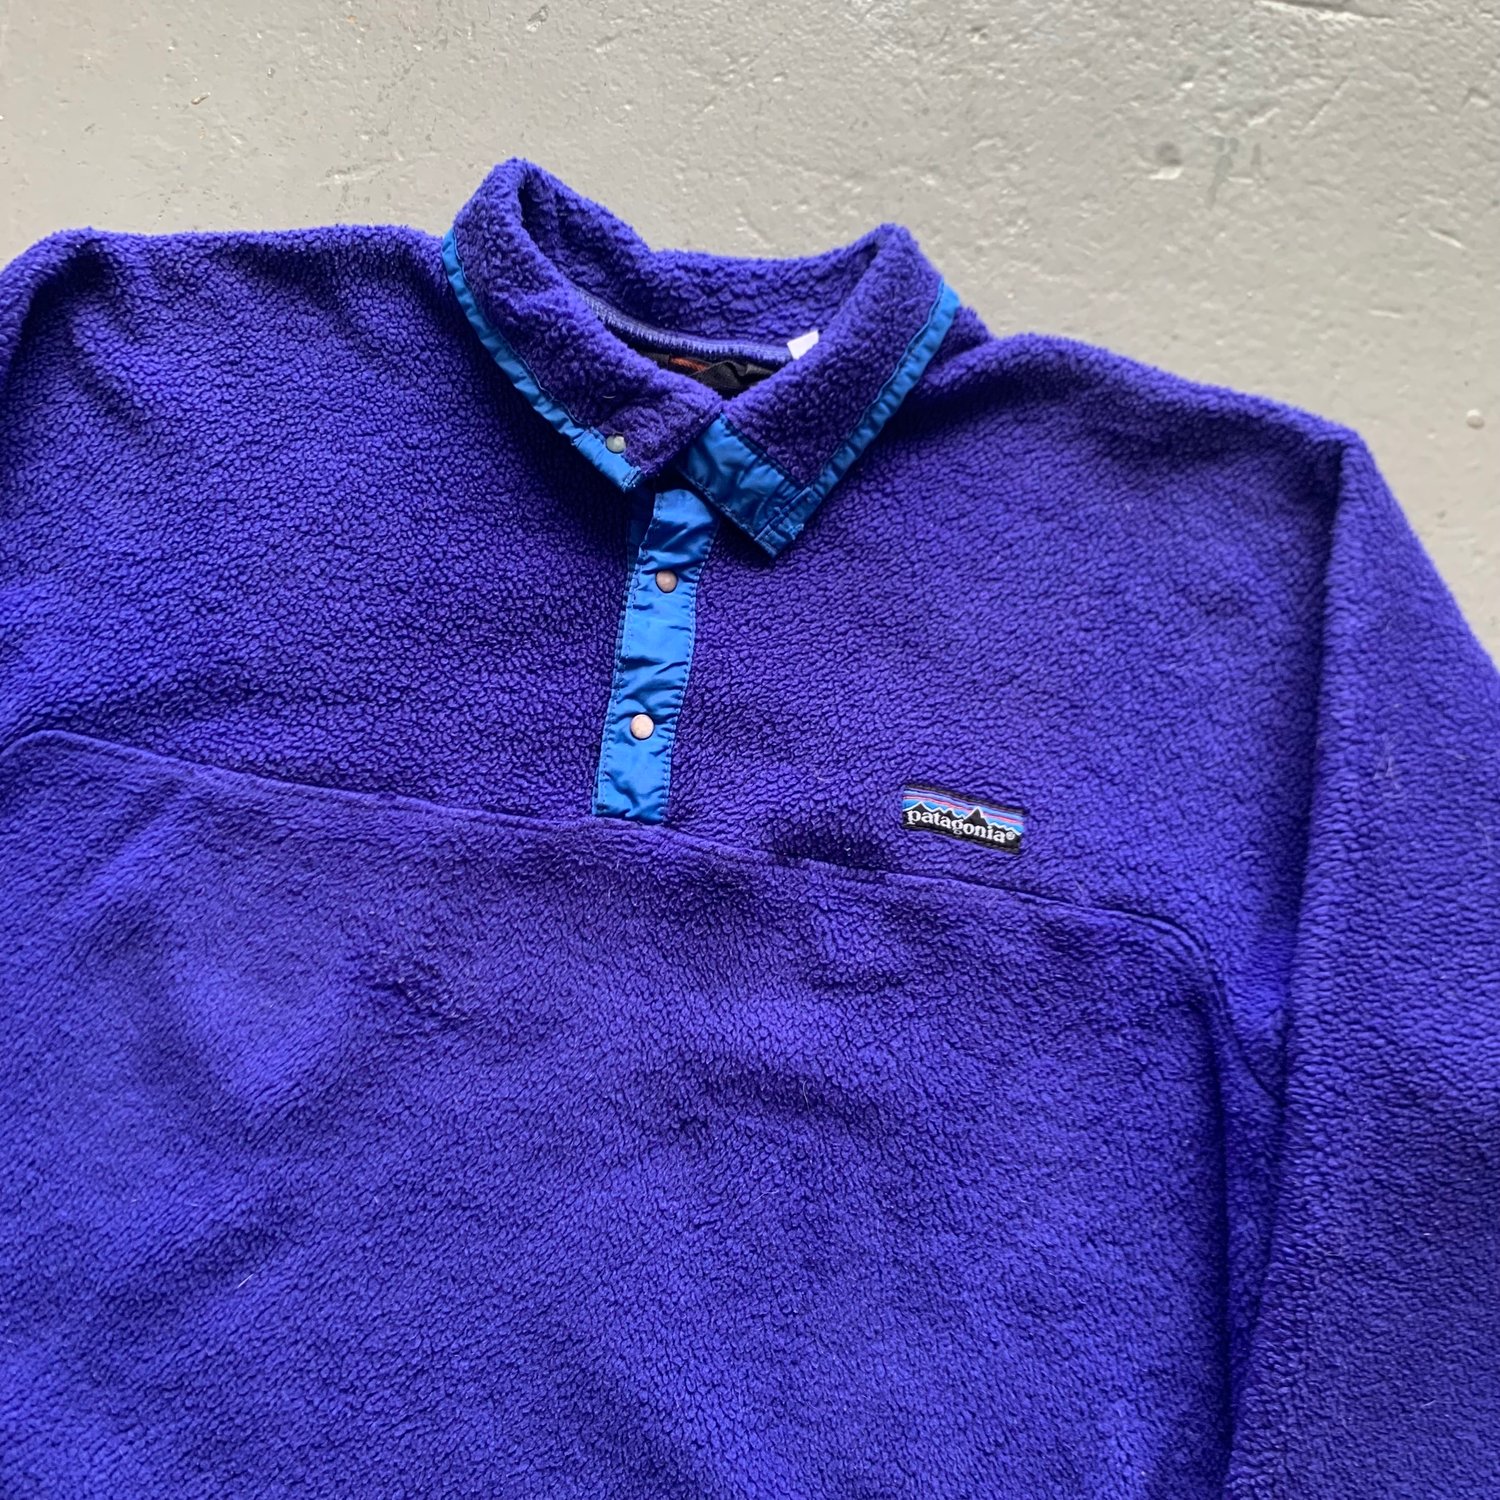 Image of Vintage Patagonia synchilla fleece size small 